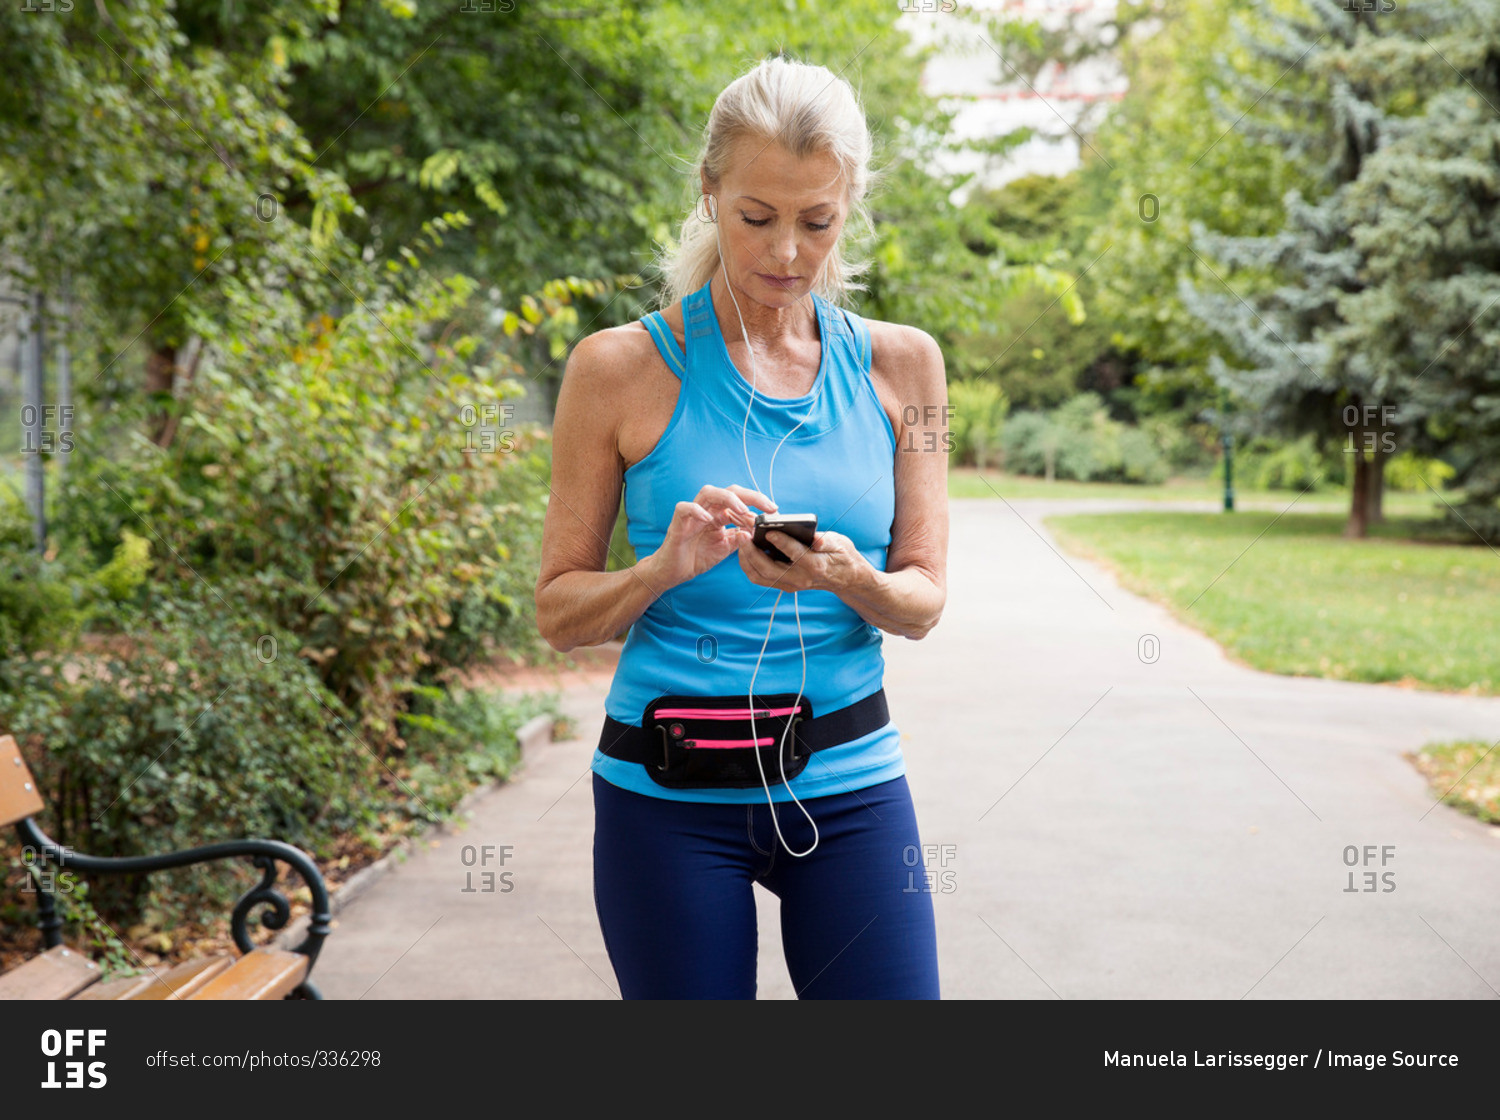 Mature woman choosing smartphone music whilst training in park